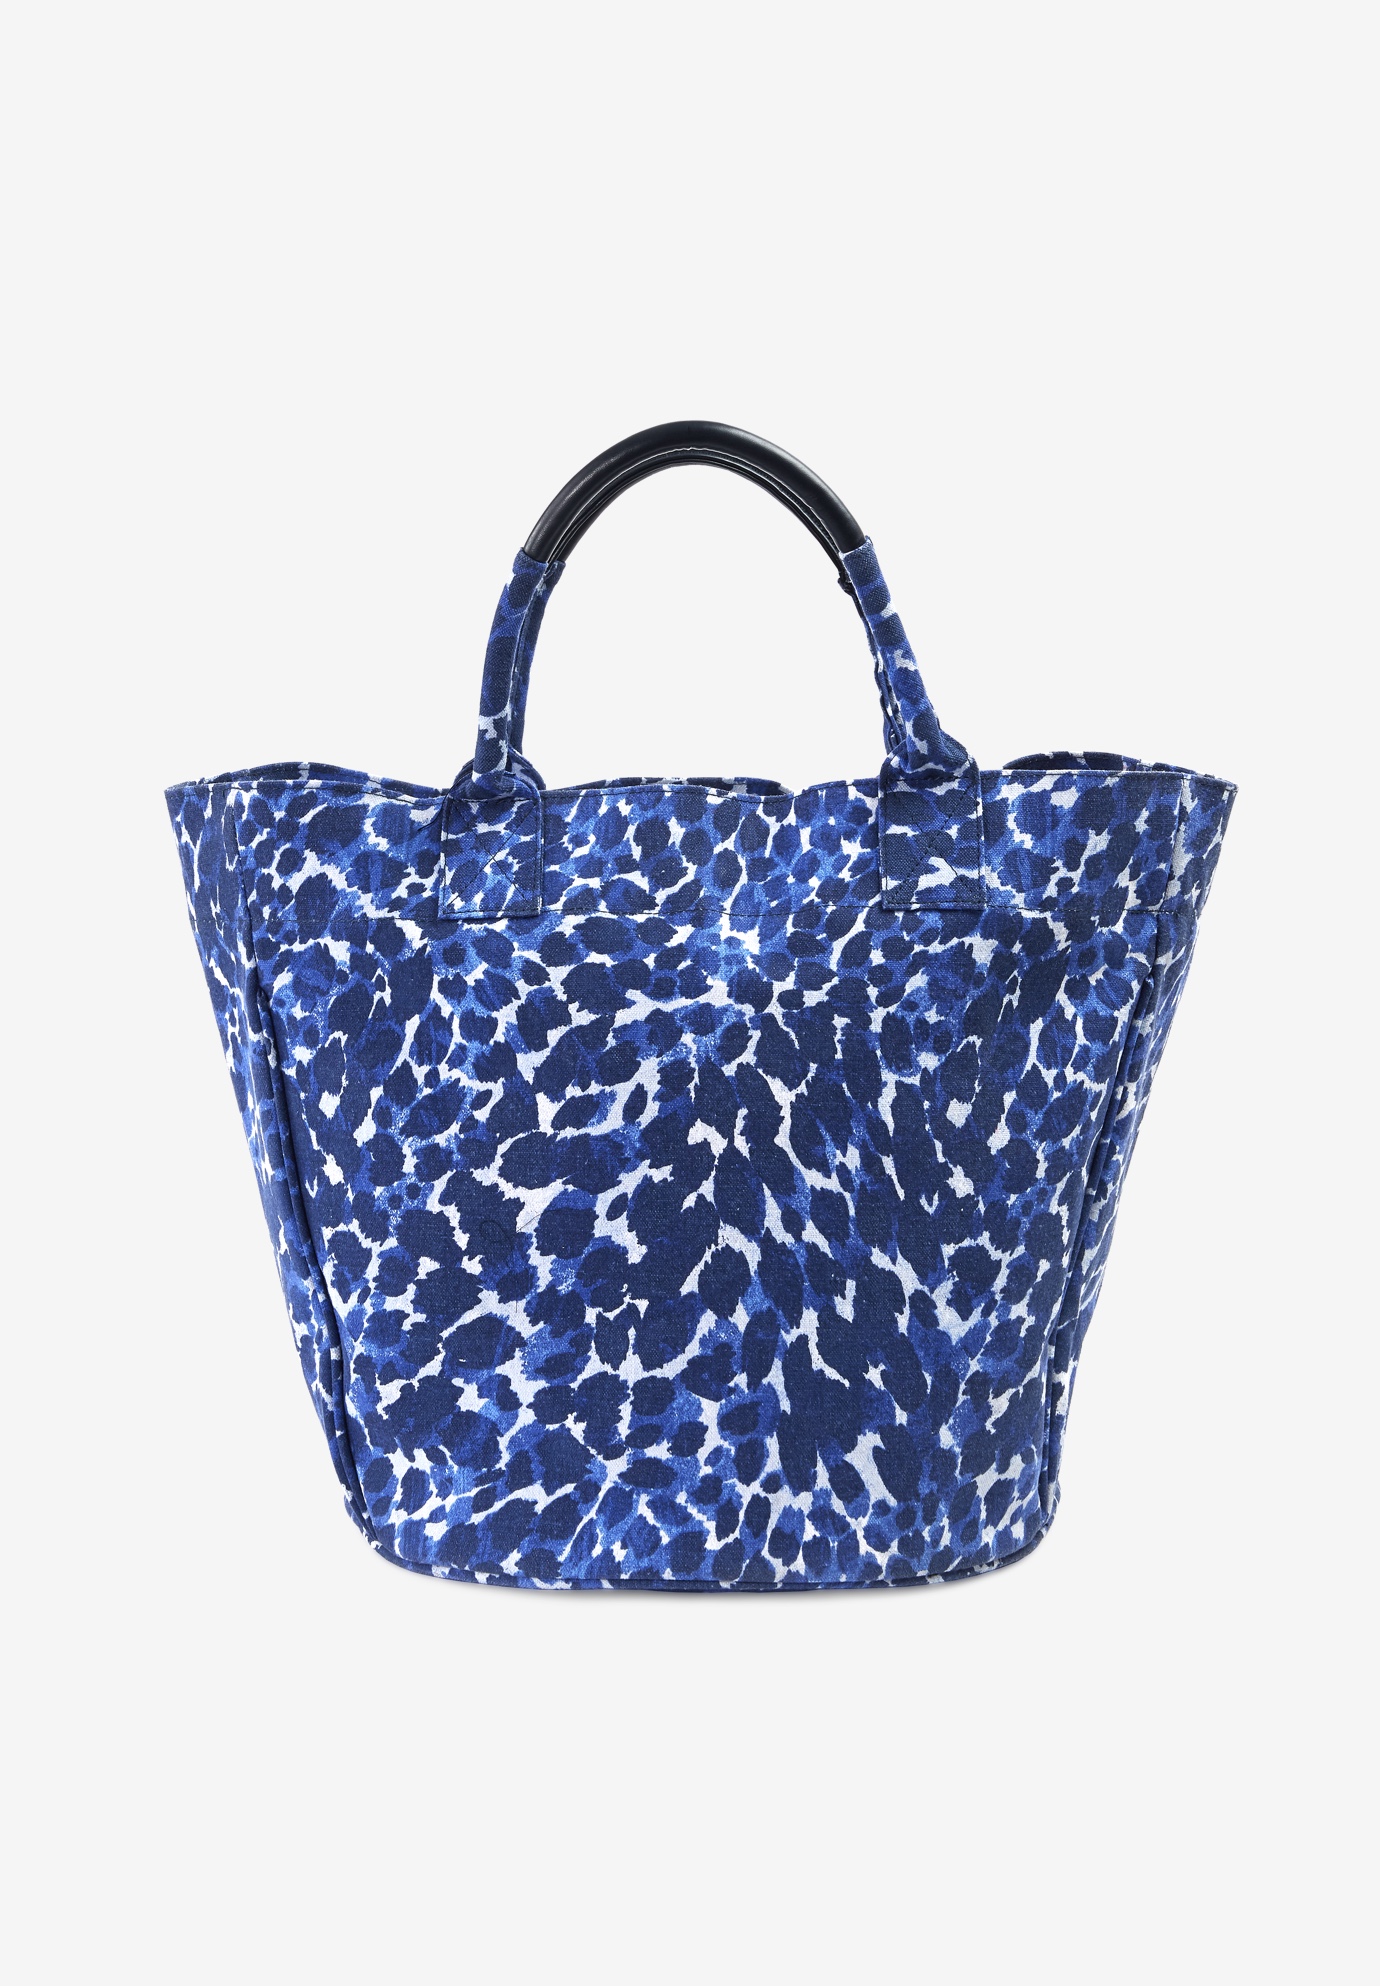 Printed Canvas Tote Bag, BLUE TEXTURED ANIMAL